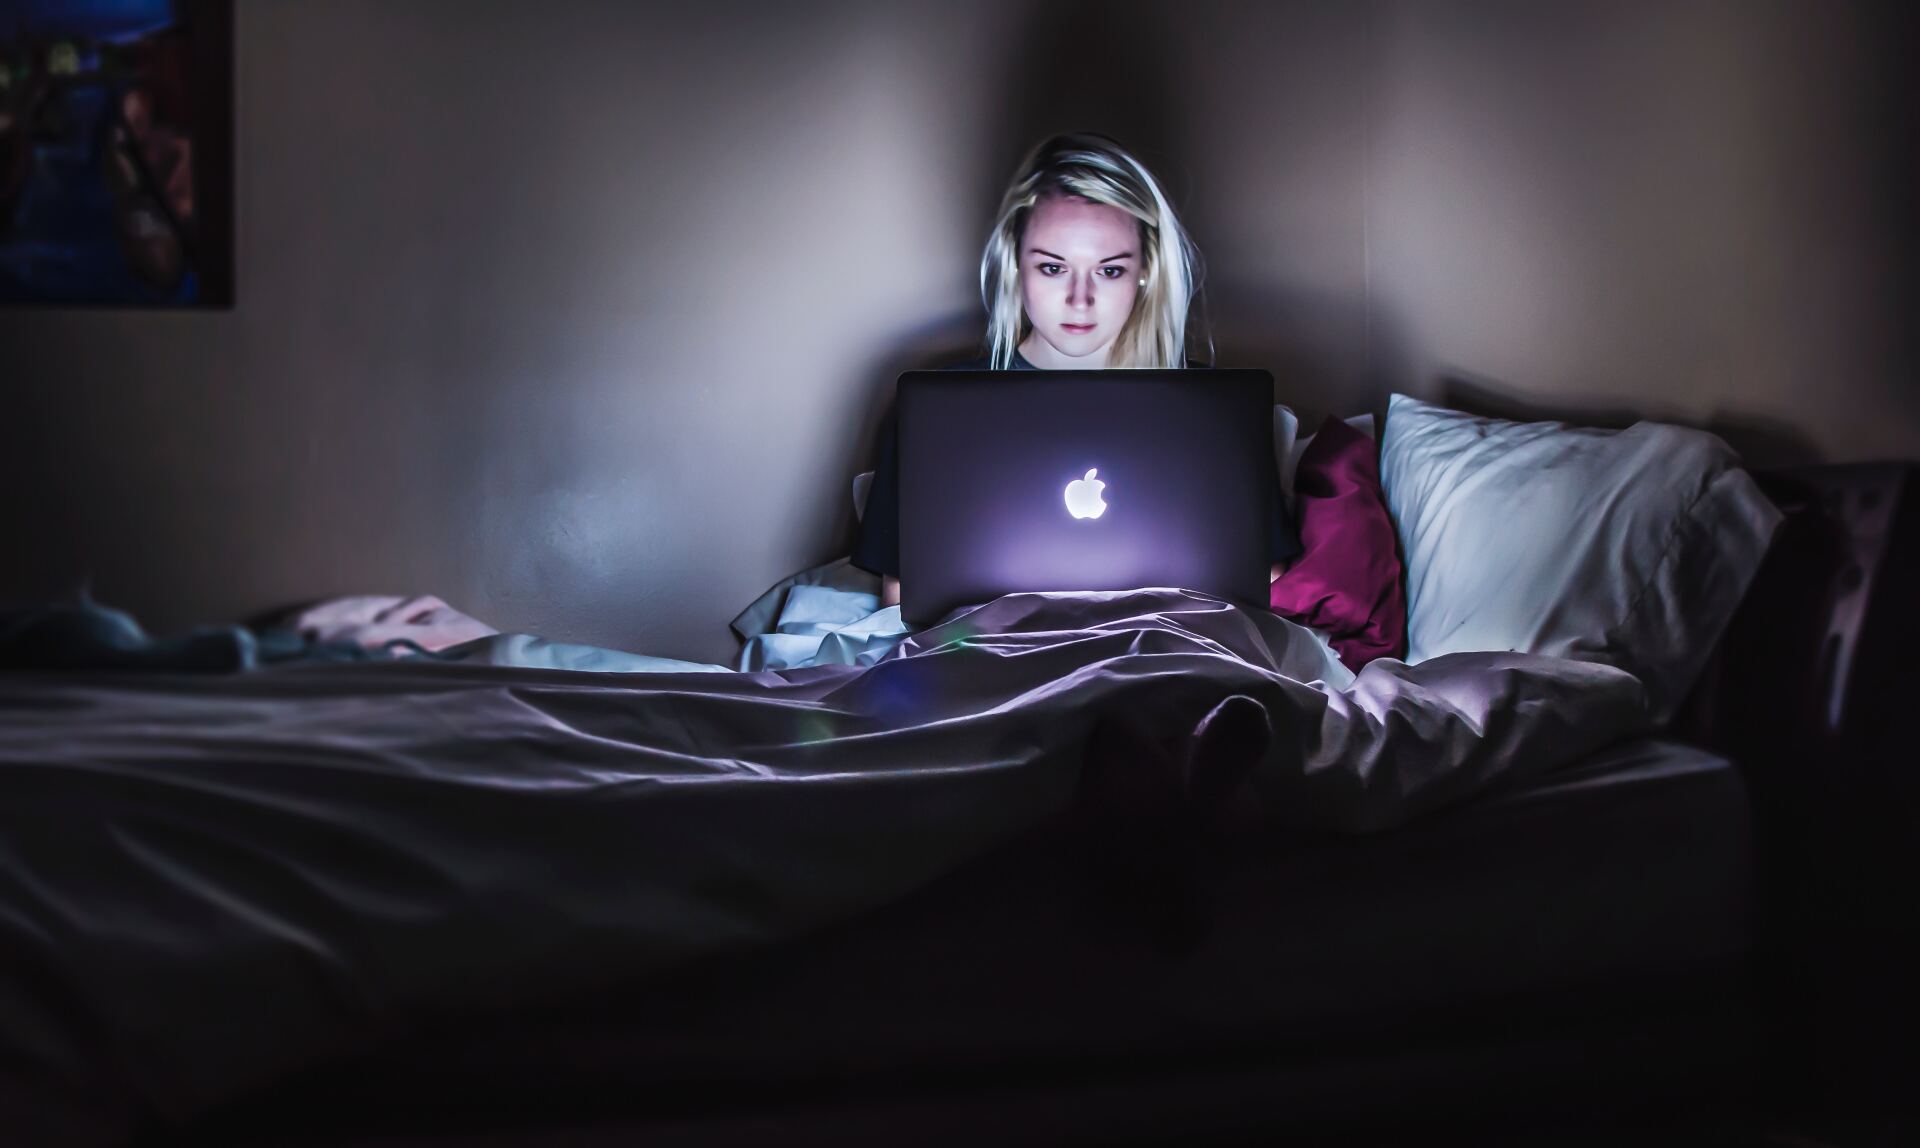 woman sitting in bed looking at lap top to see if having another type of OCD would be easier